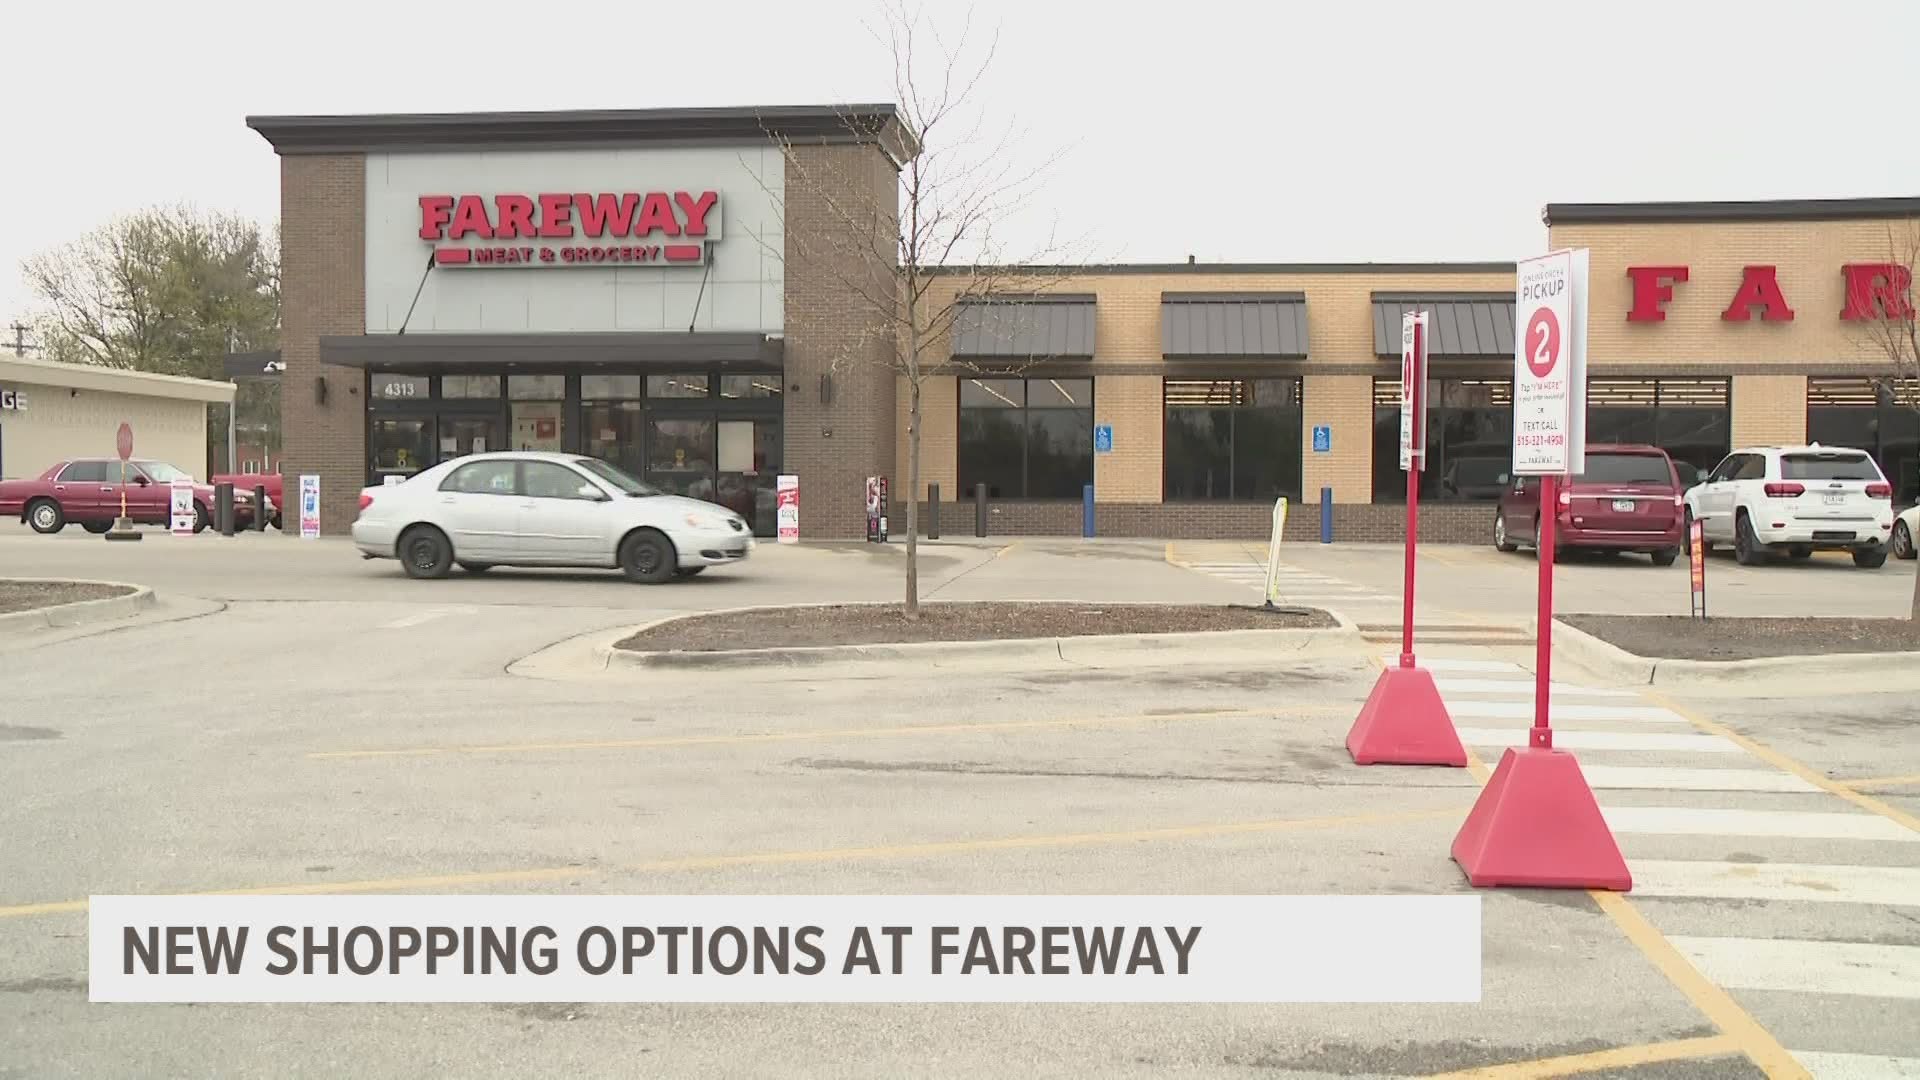 Online shopping is available at nearly 50 Fareway stores. They said they're also exploring a delivery option for customers to take advantage of.